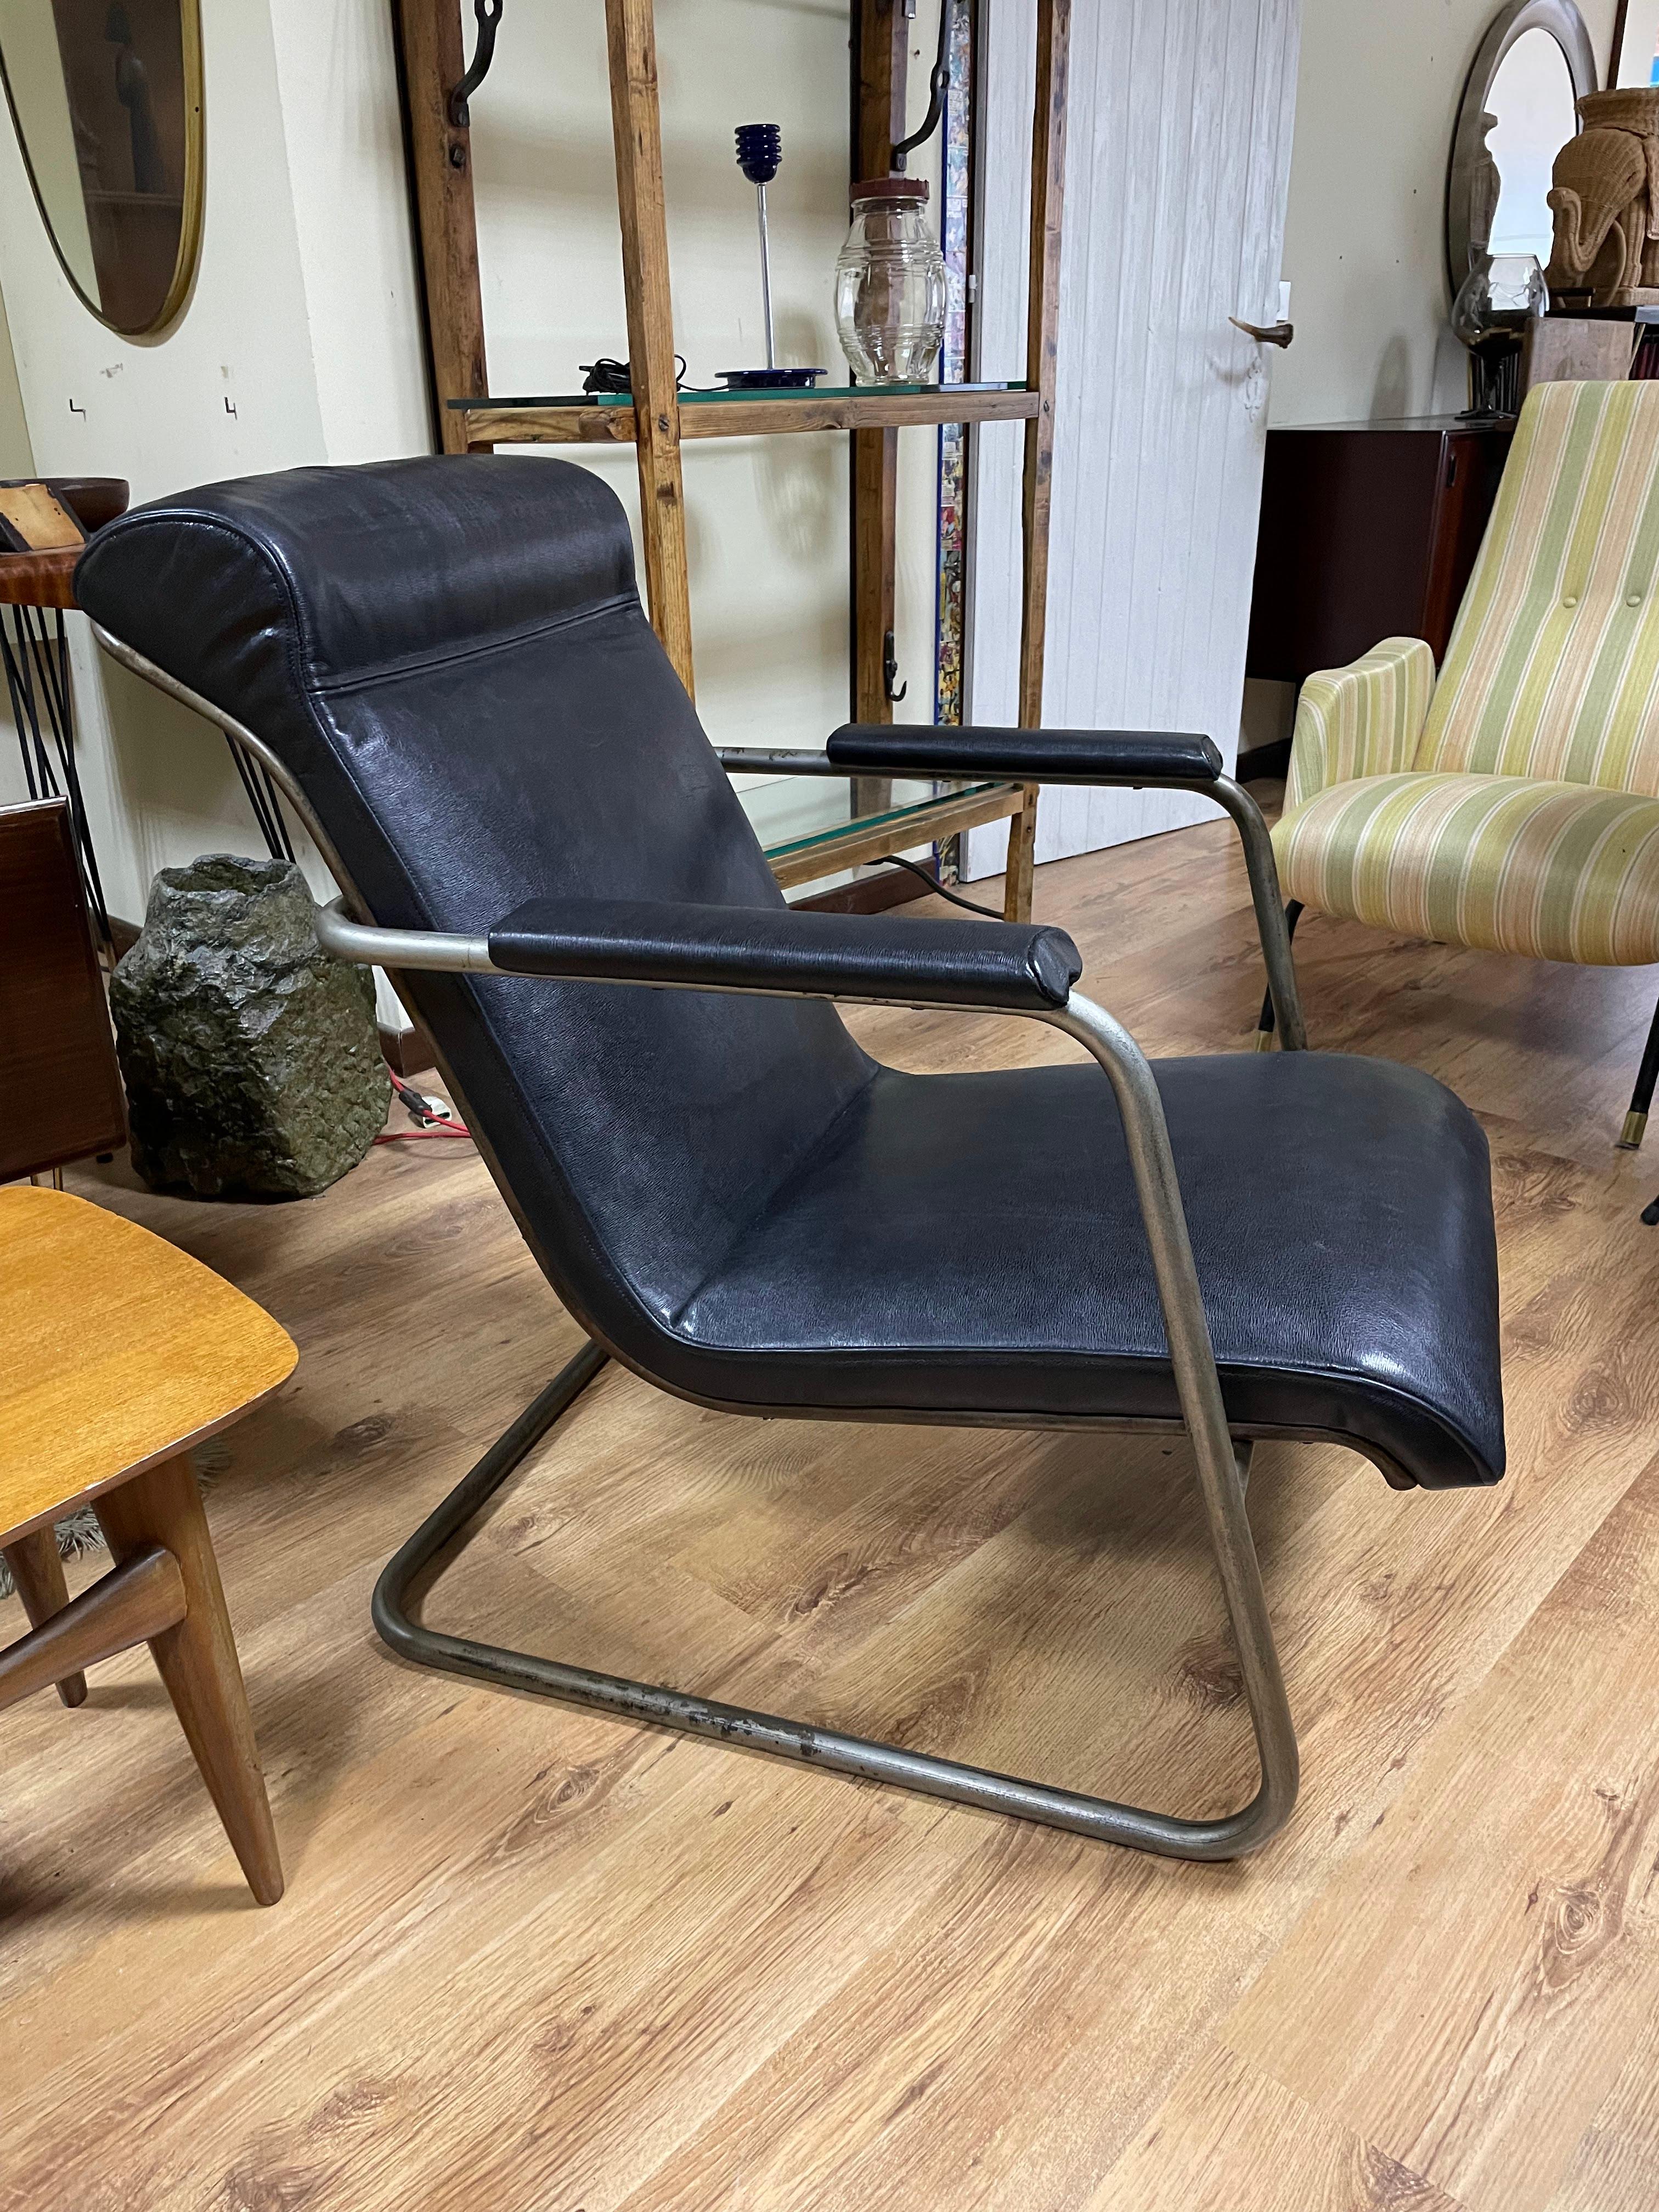 30s armchair in pure Bauhaus style.
Structure in iron tubular, black leather coating.
The leather seat is independent of its base, on which it is simply rested.
The innovative modernist style of the Bauhaus style is found in this armchair in